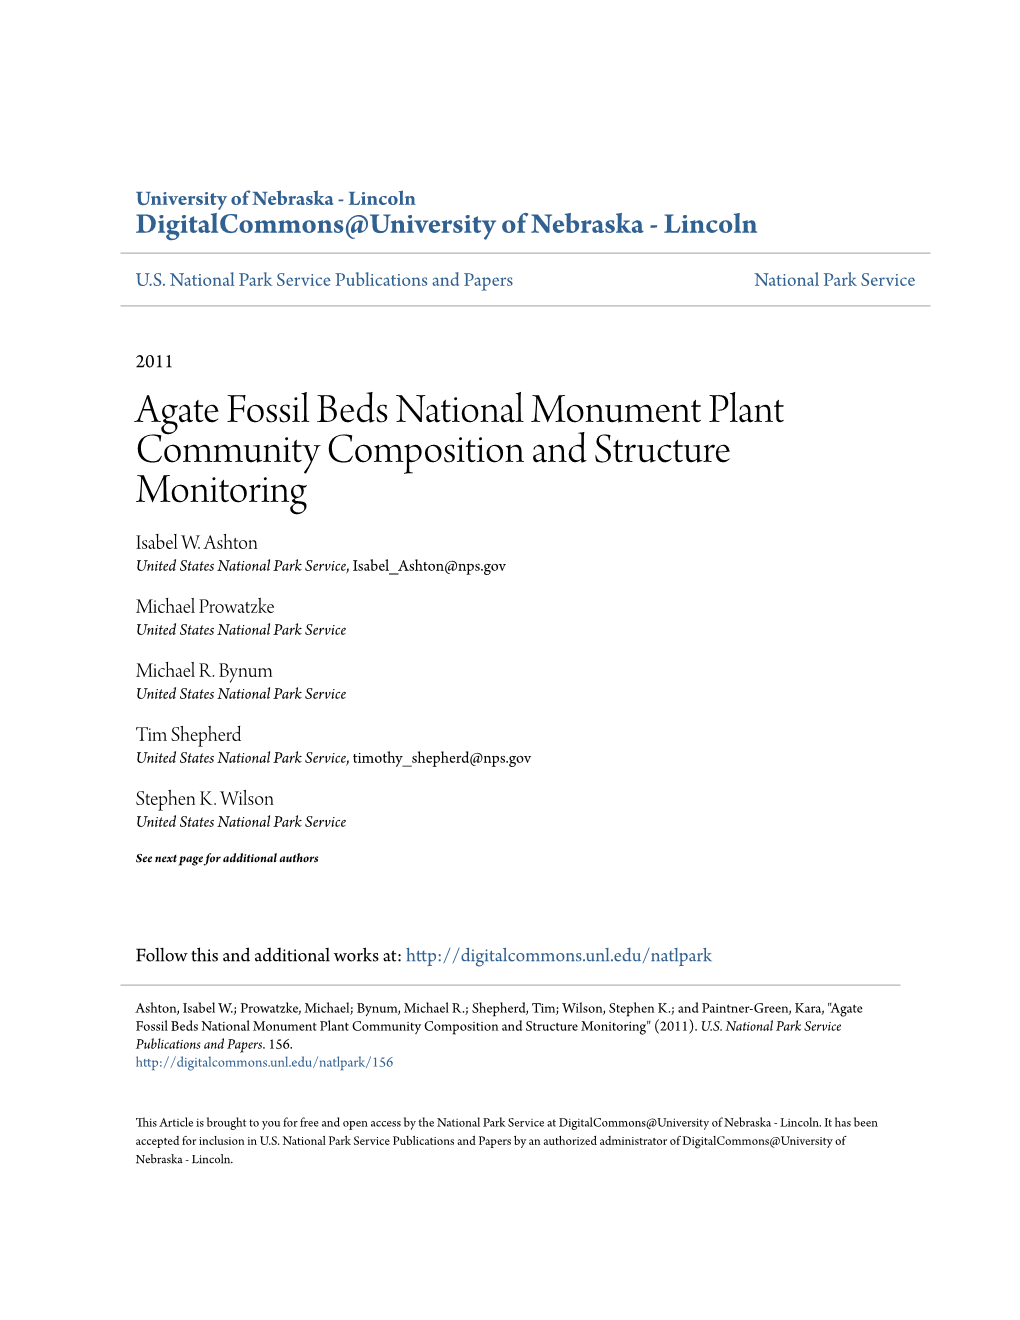 Agate Fossil Beds National Monument Plant Community Composition and Structure Monitoring Isabel W